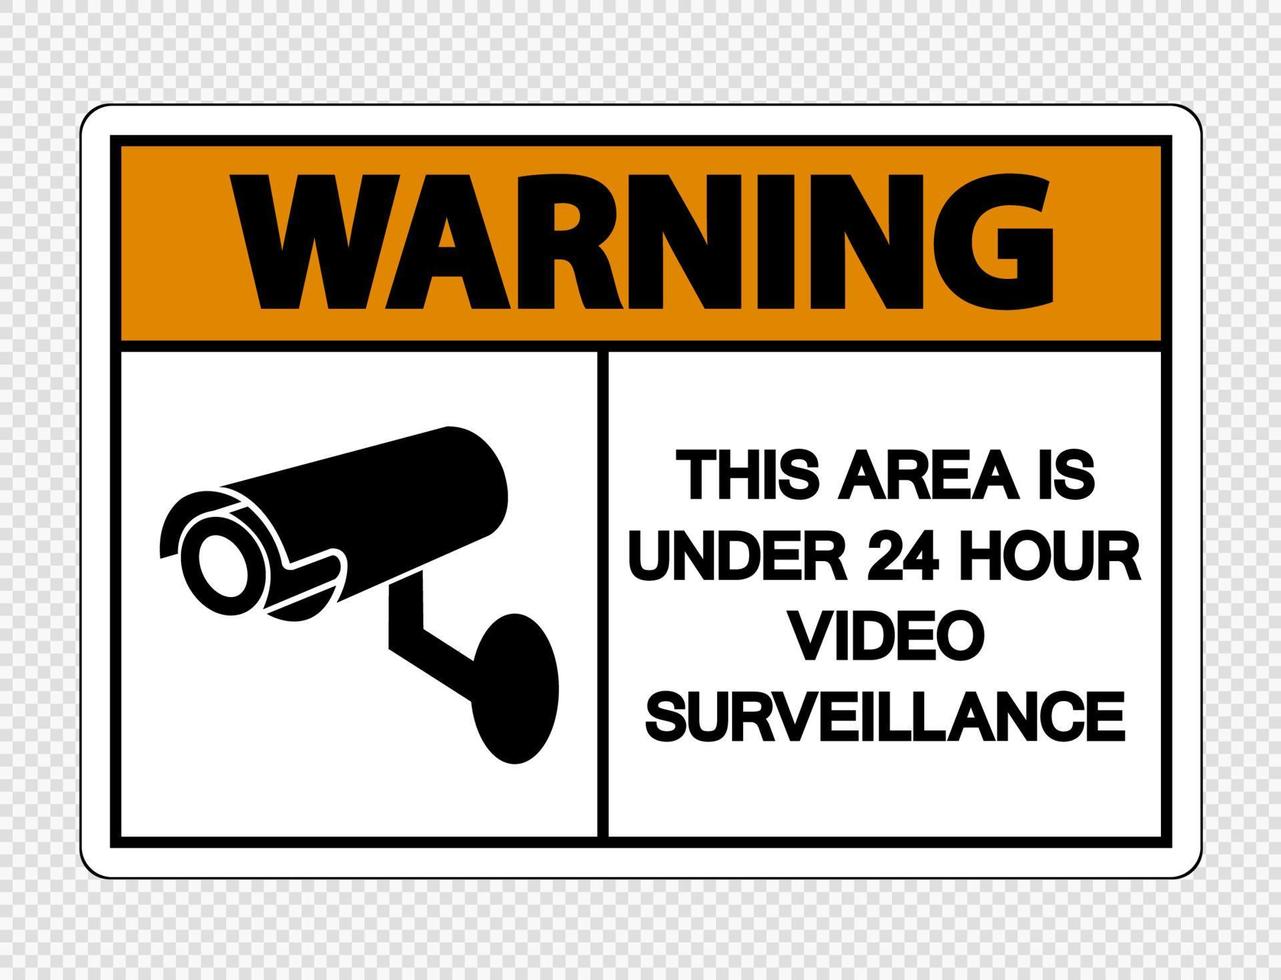 Warning This Area is Under 24 Hour Video Surveillance Sign on transparent background vector